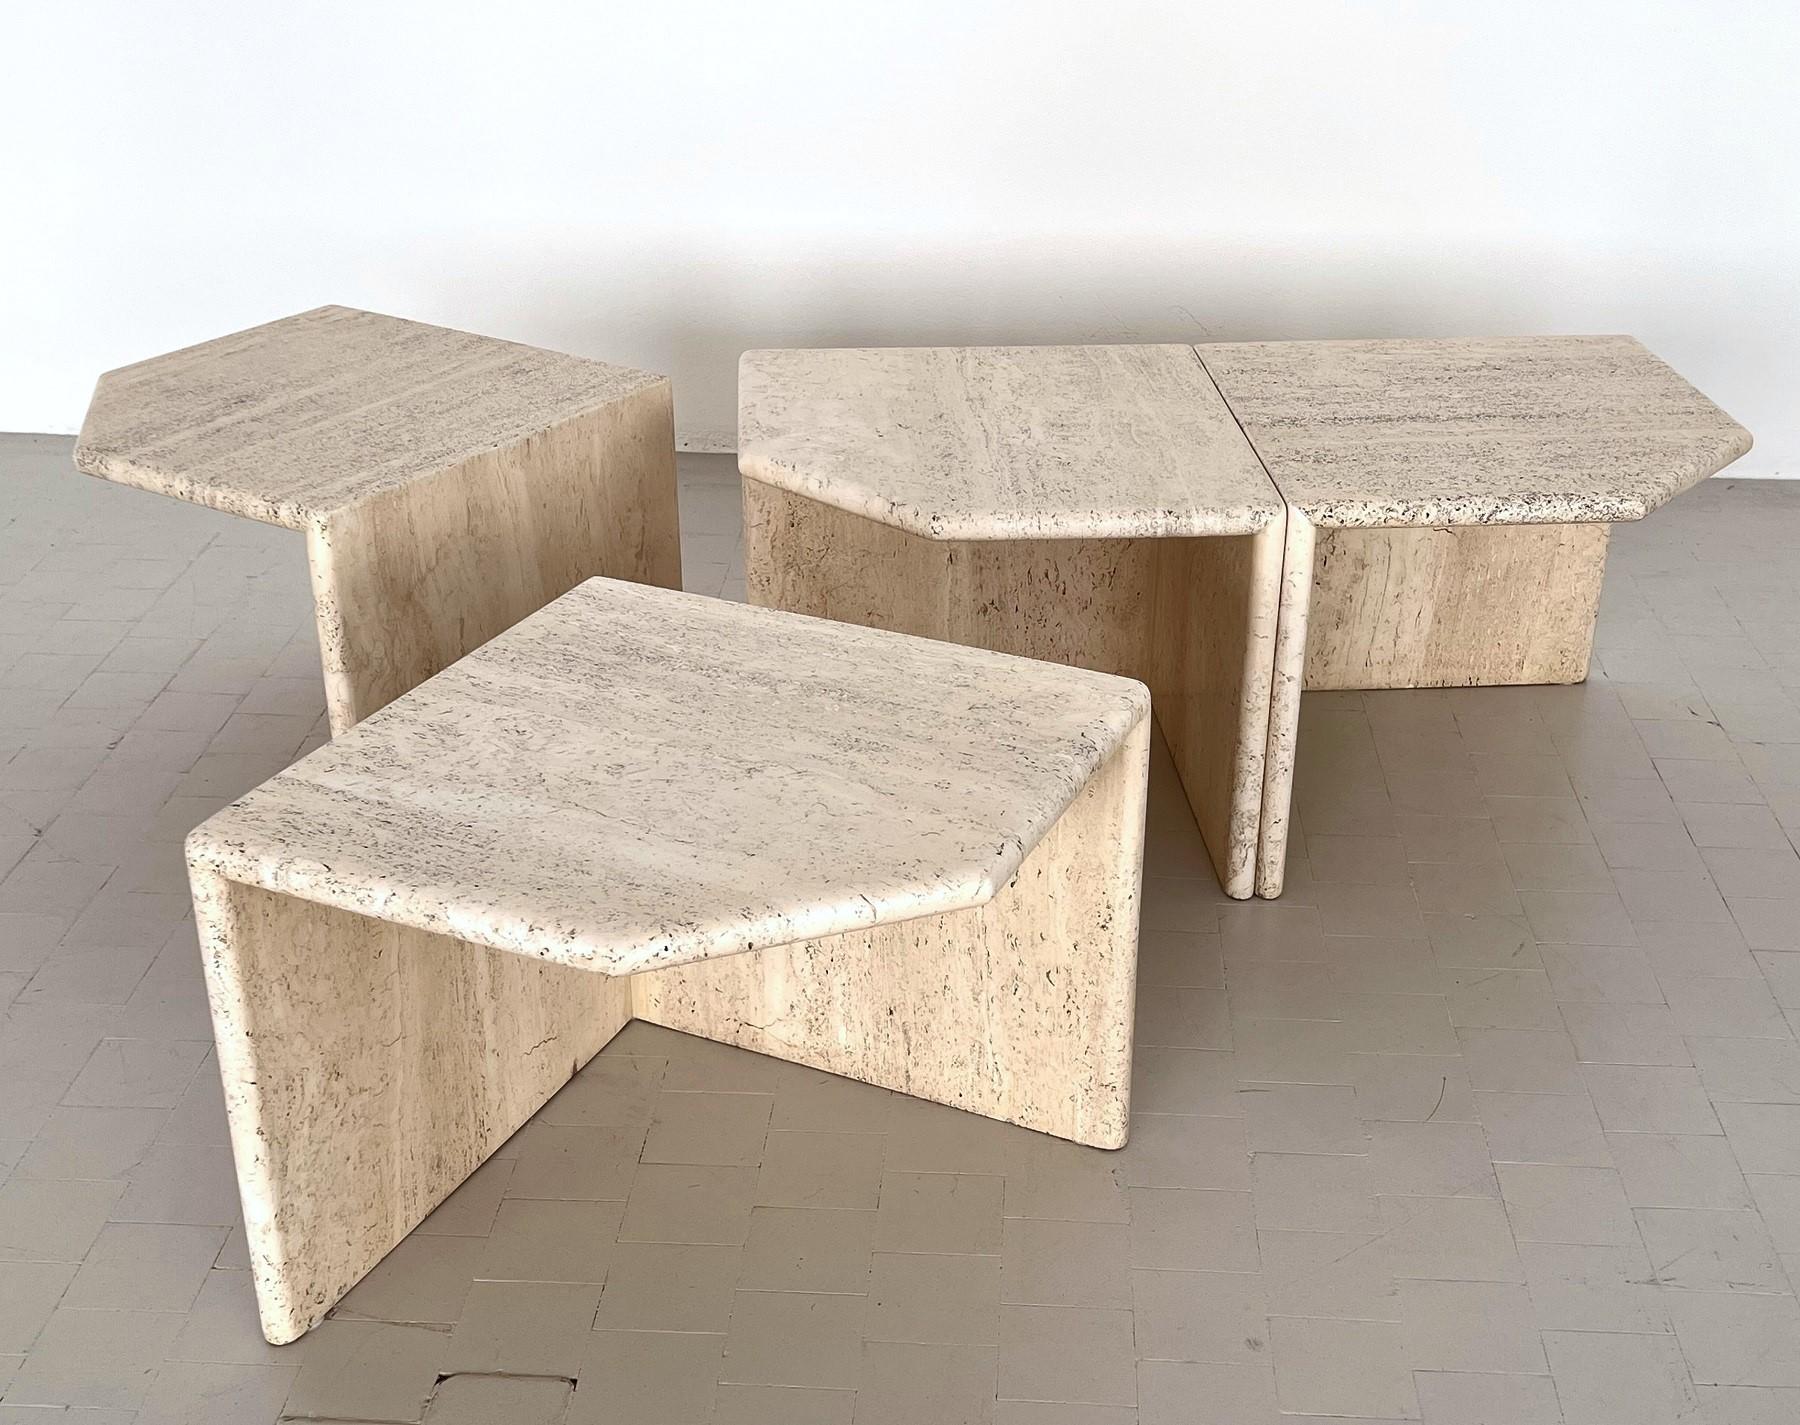 Italian Midcentury Sectional Travertine Marble Coffee Table of Four Pieces, 1970 For Sale 1